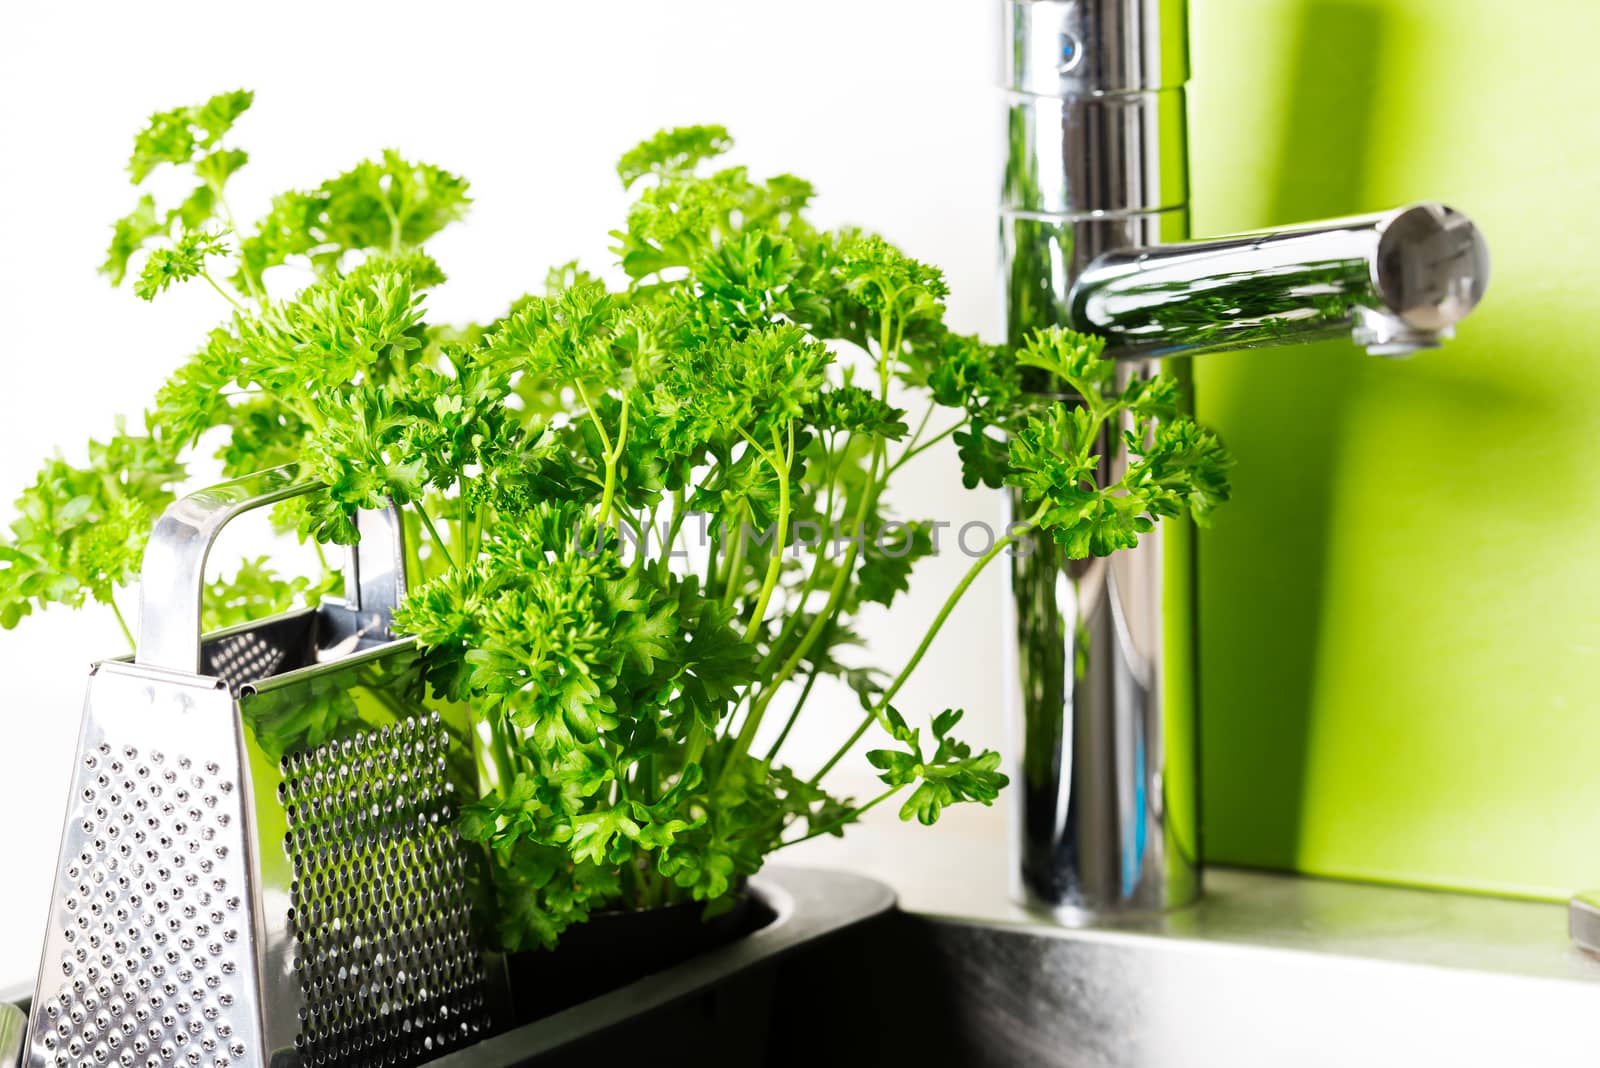 At kitchen: faucet, grater and fresh parsley